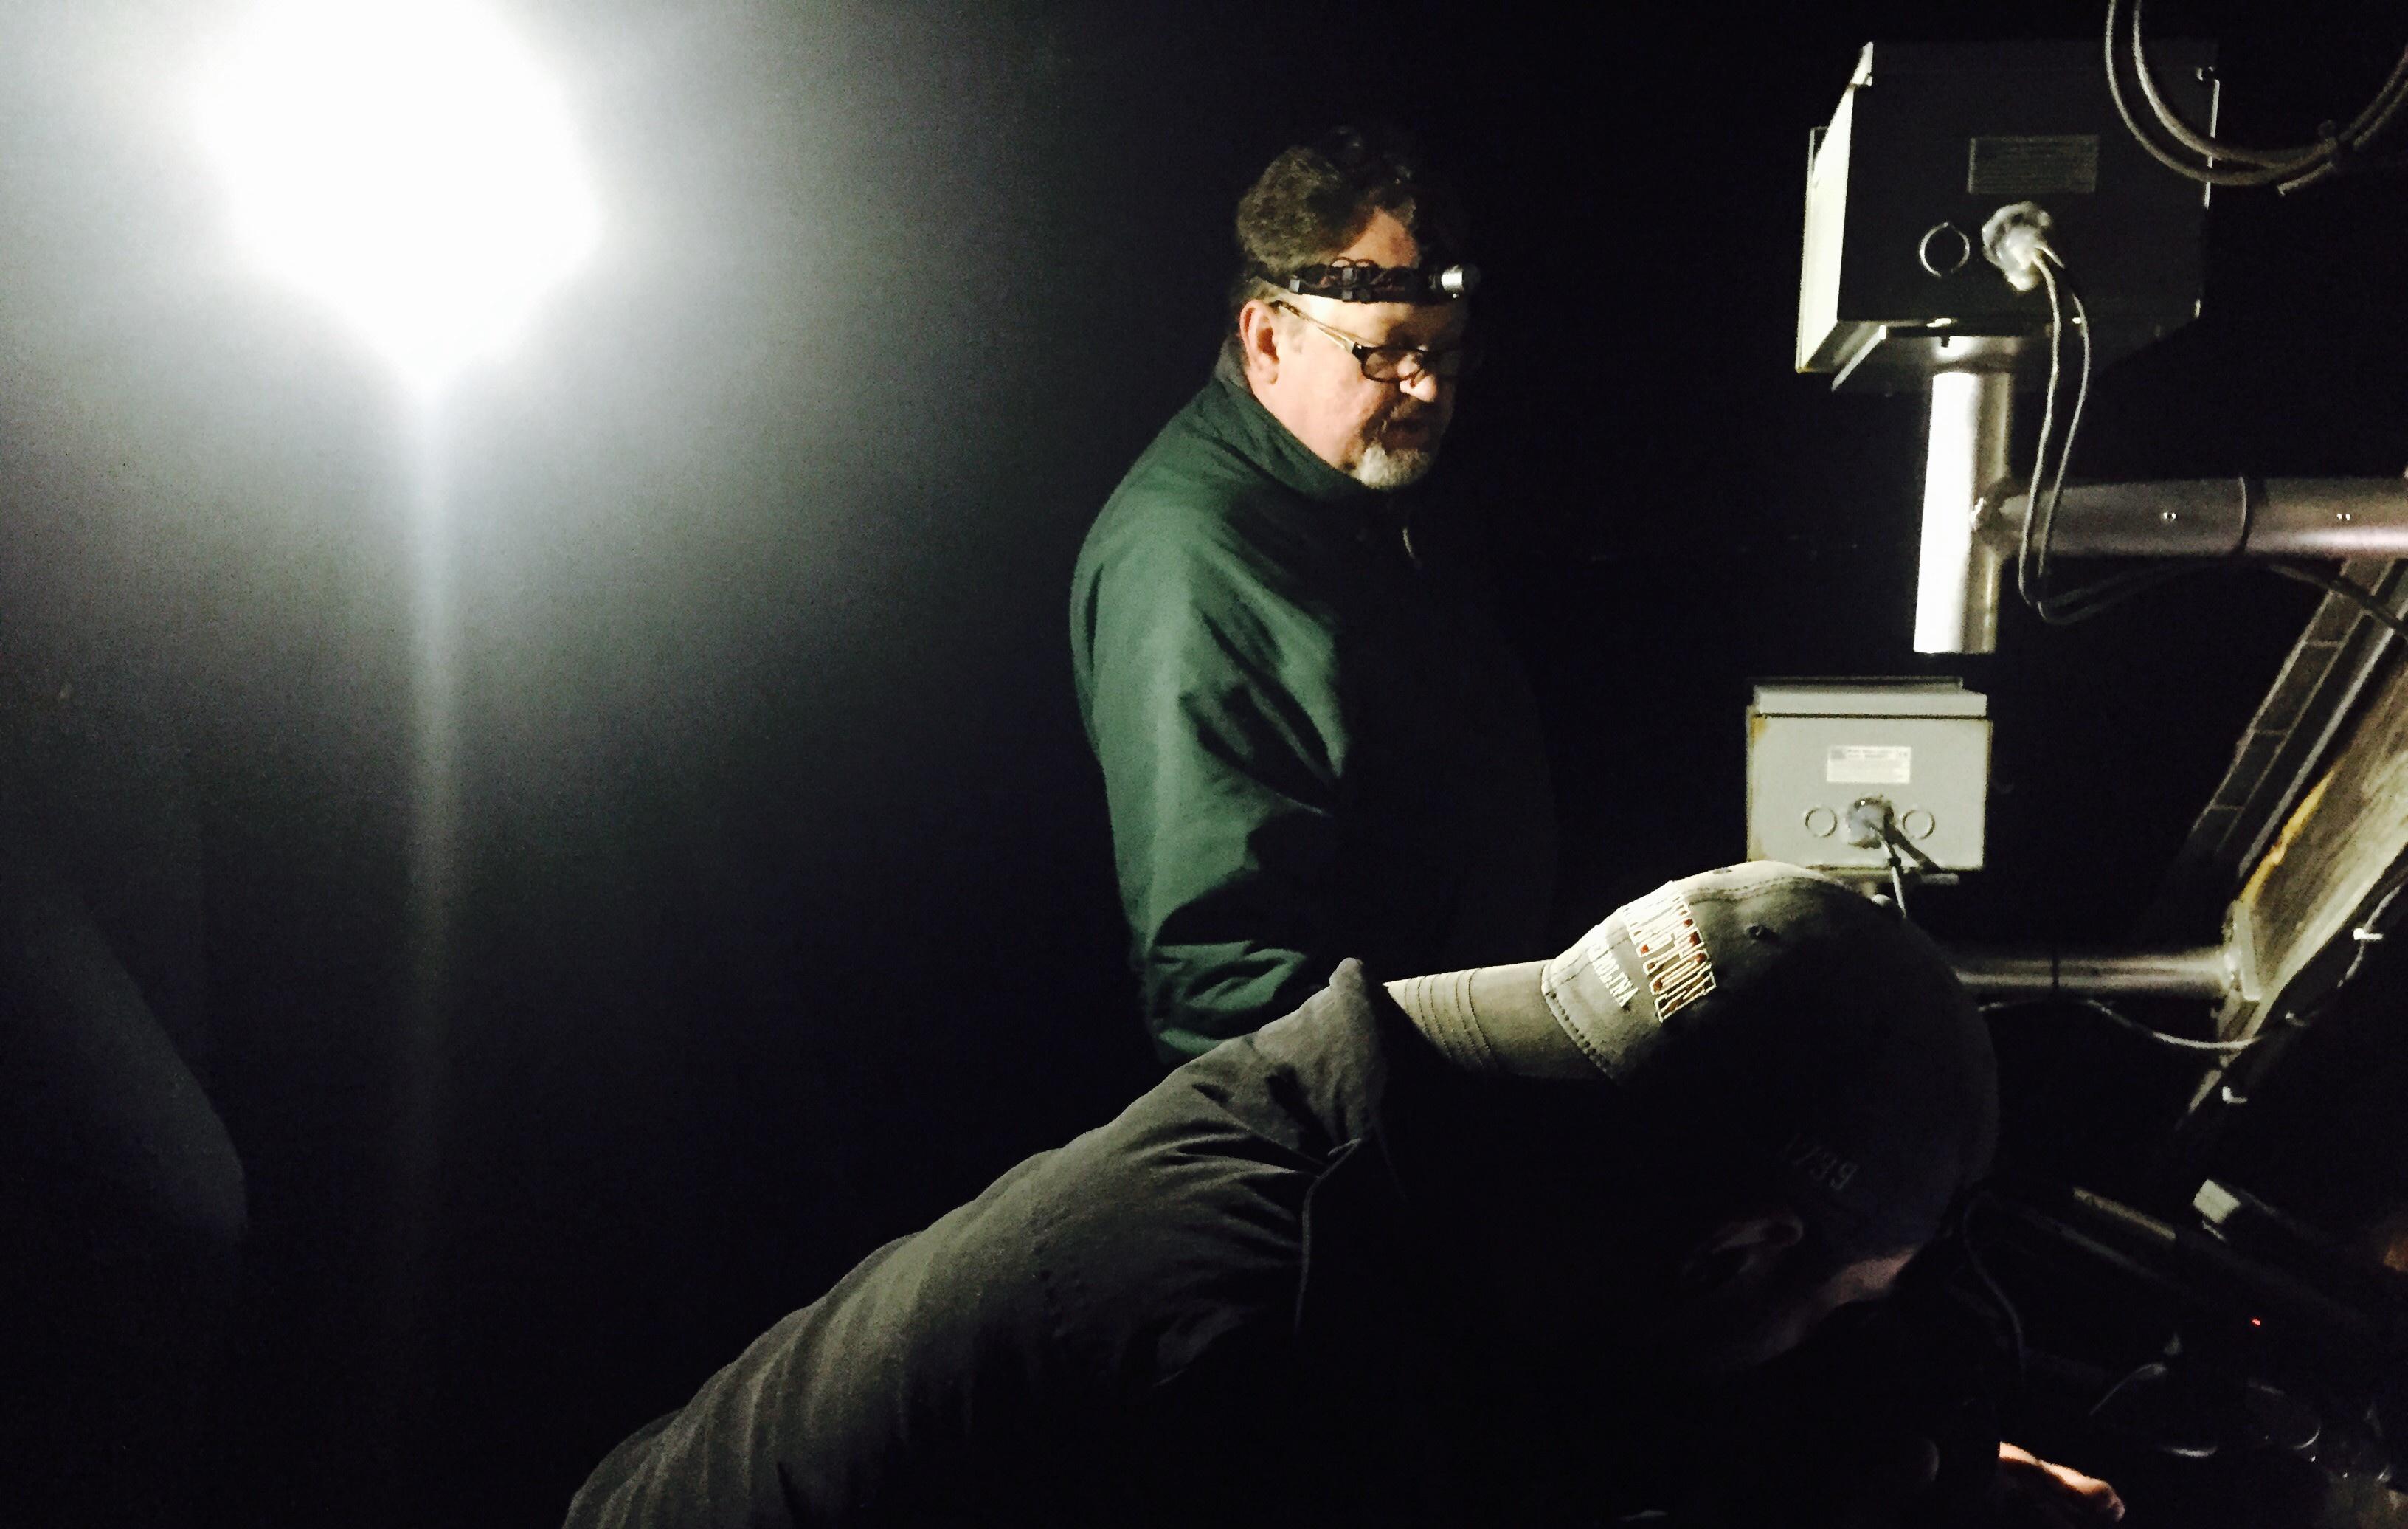 Two men observing a set of camera equipment on a dark night. One man is bent down wearing a backwards cap as the other is standing beside him wearing a green shirt and a head flashlight